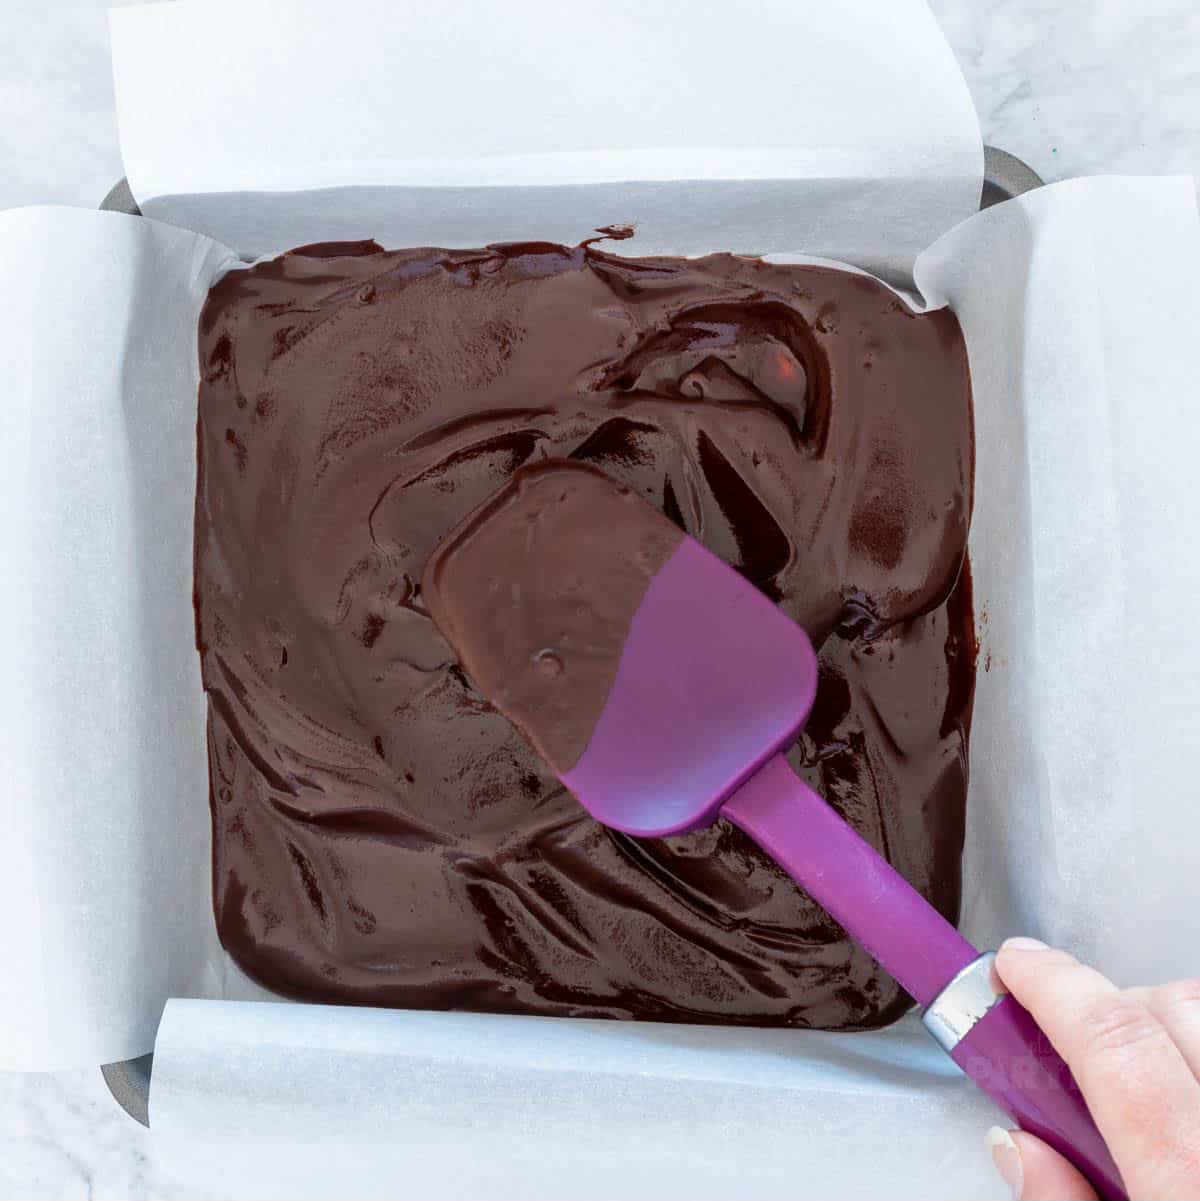 Spreading a thin layer of chocolate in a pan.